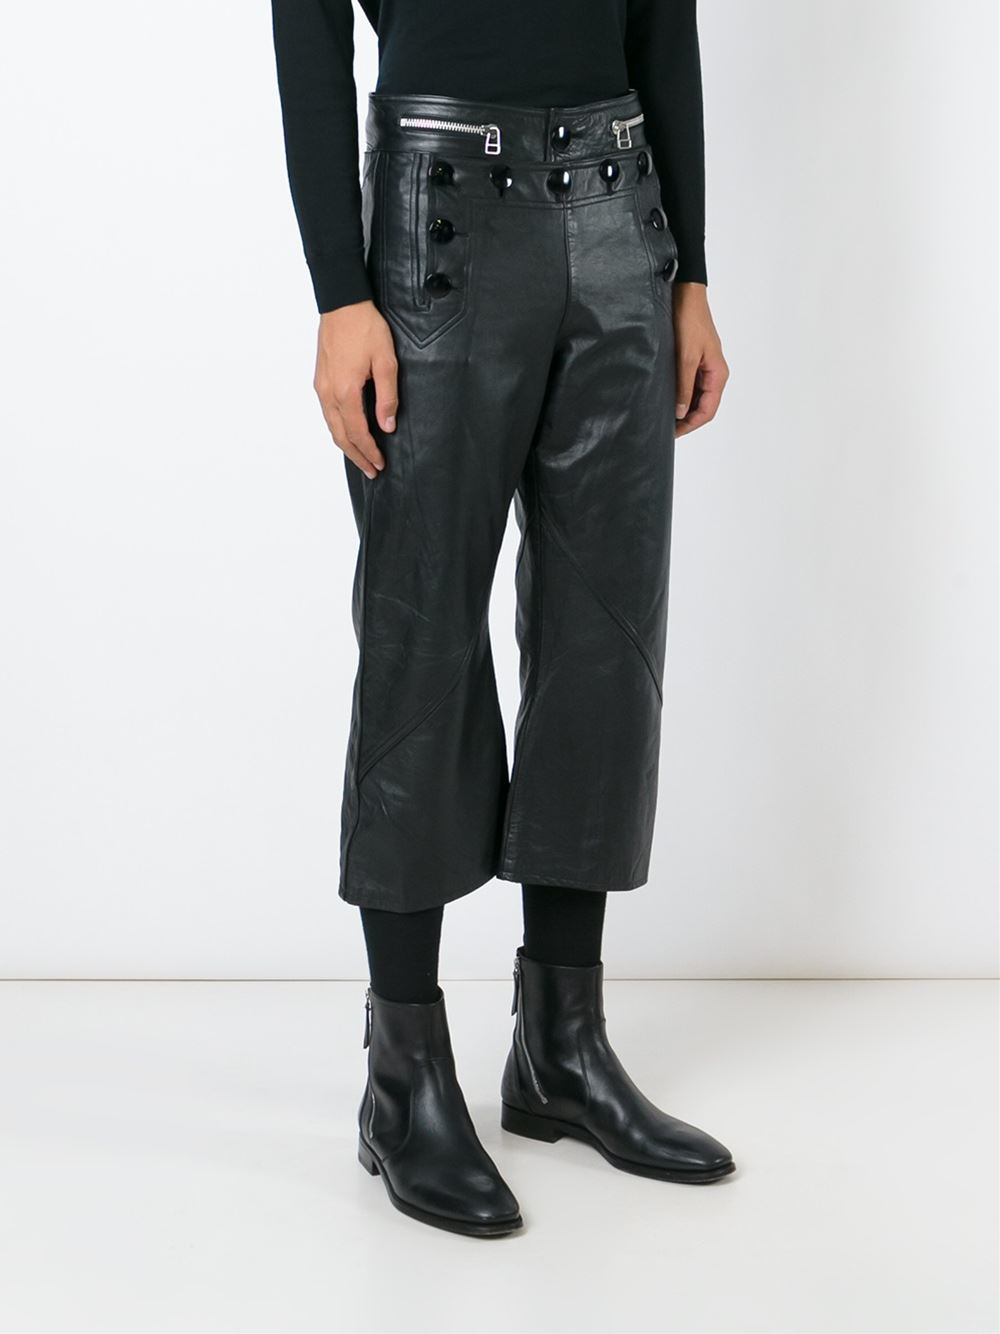 Jean Paul Gaultier Leather Sailor Trousers in Black for Men - Lyst